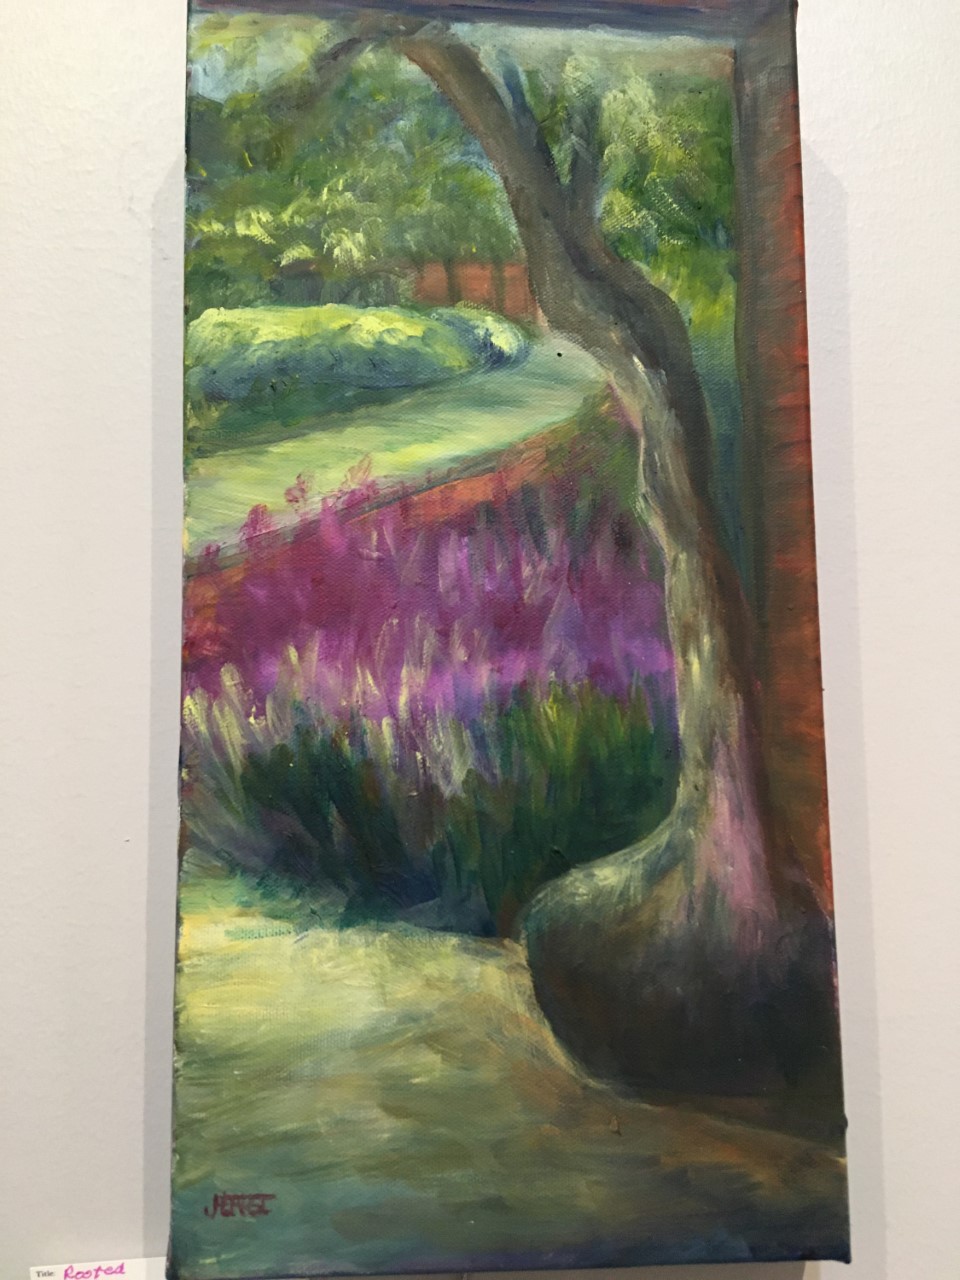 Rooted
Oil
16 x 8
Jean A. Hearst, artist

Plein air painting done under one of the entrances to The Hermitage Museum and Gardens